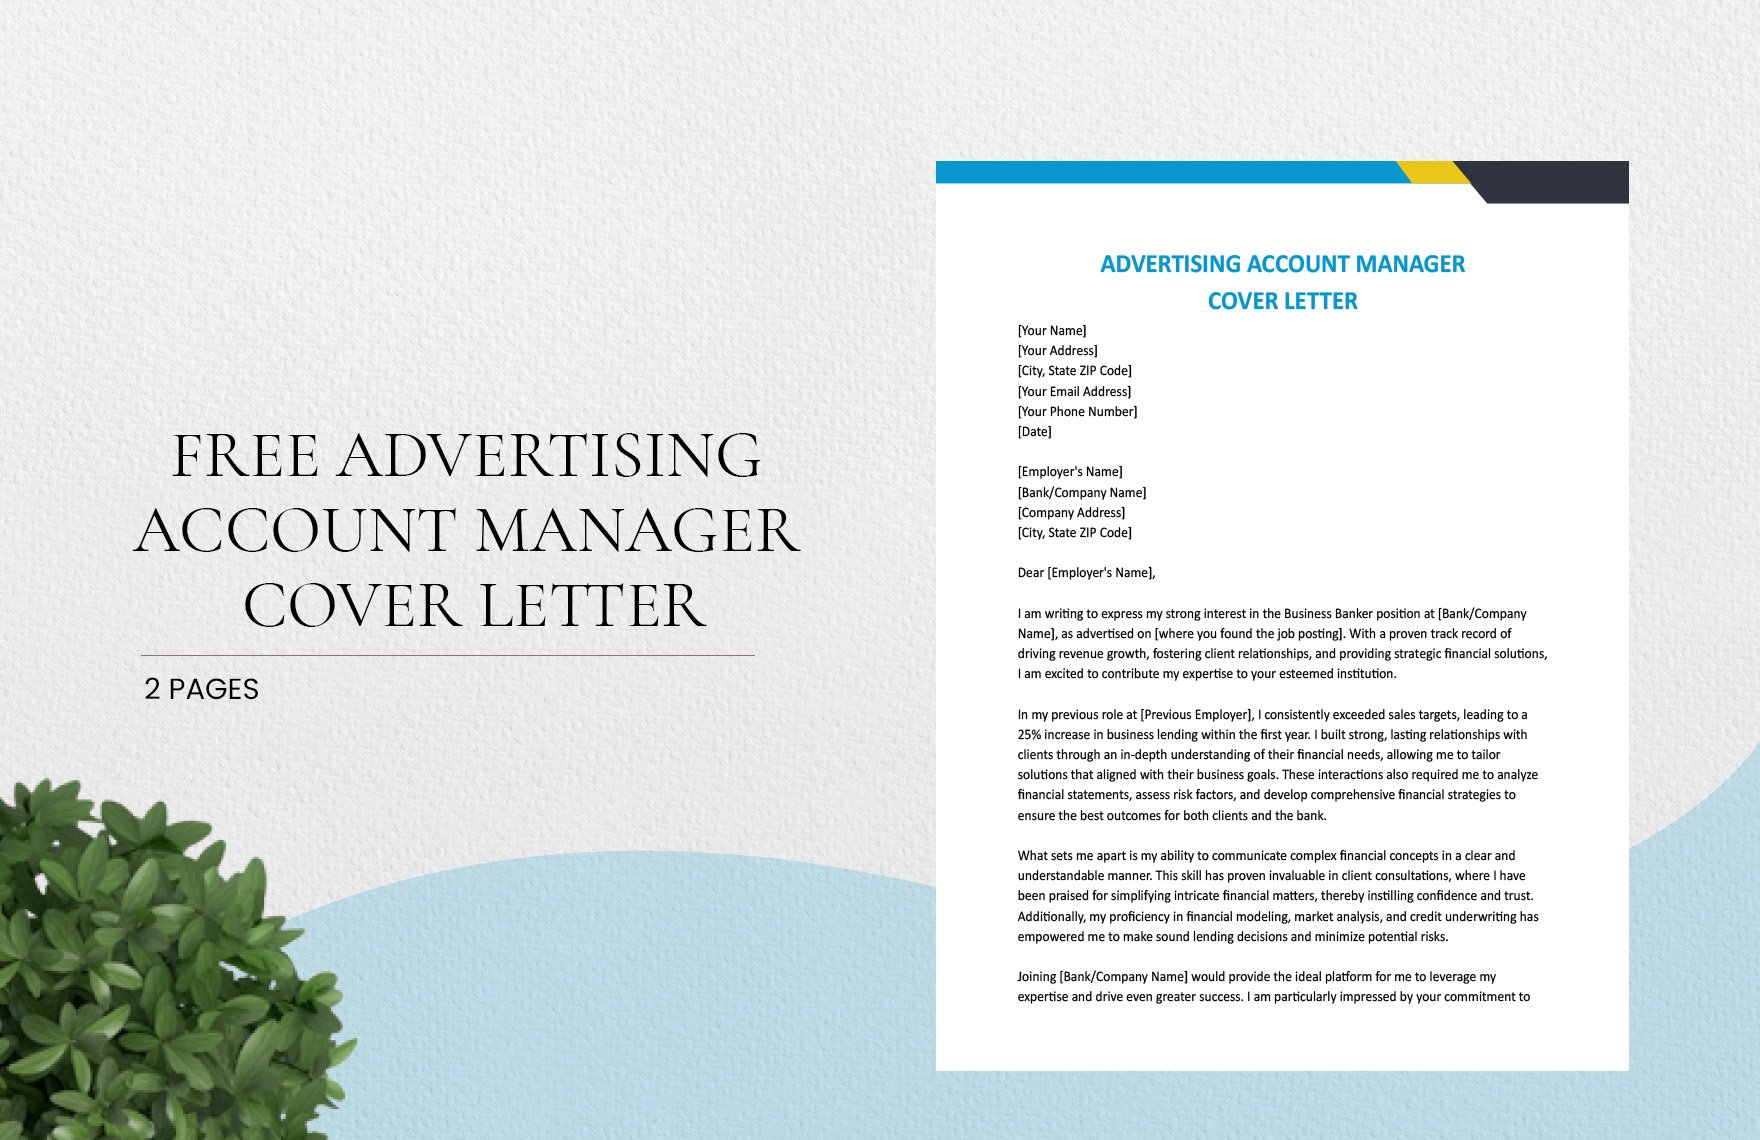 Advertising Account Manager Cover Letter